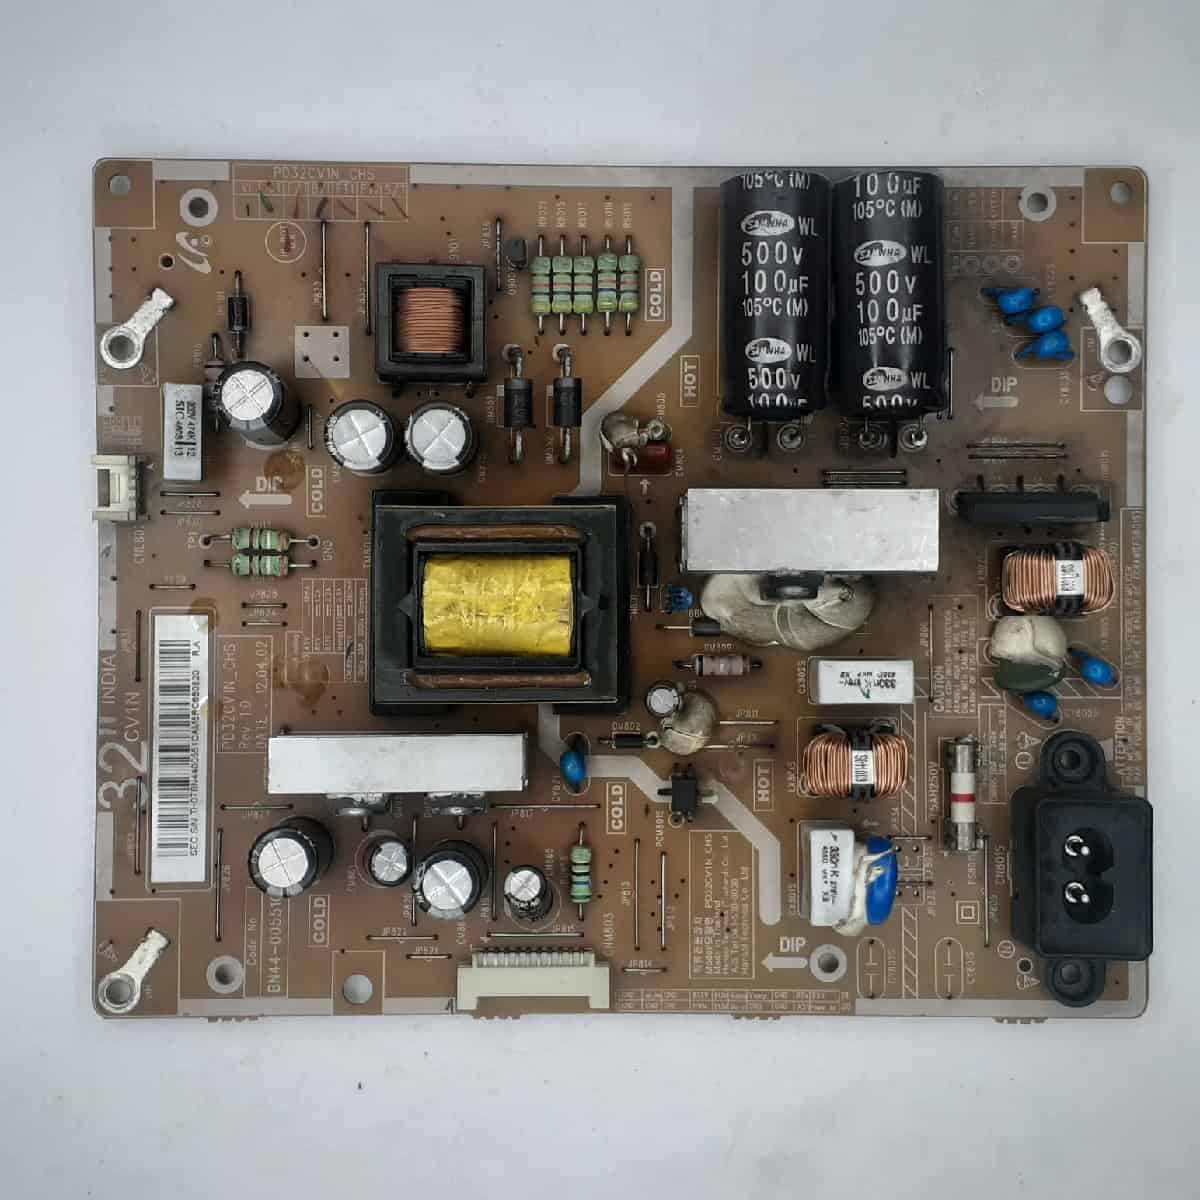 UE32EH6030 SAMSUNG POWER SUPPLY FOR LED TV